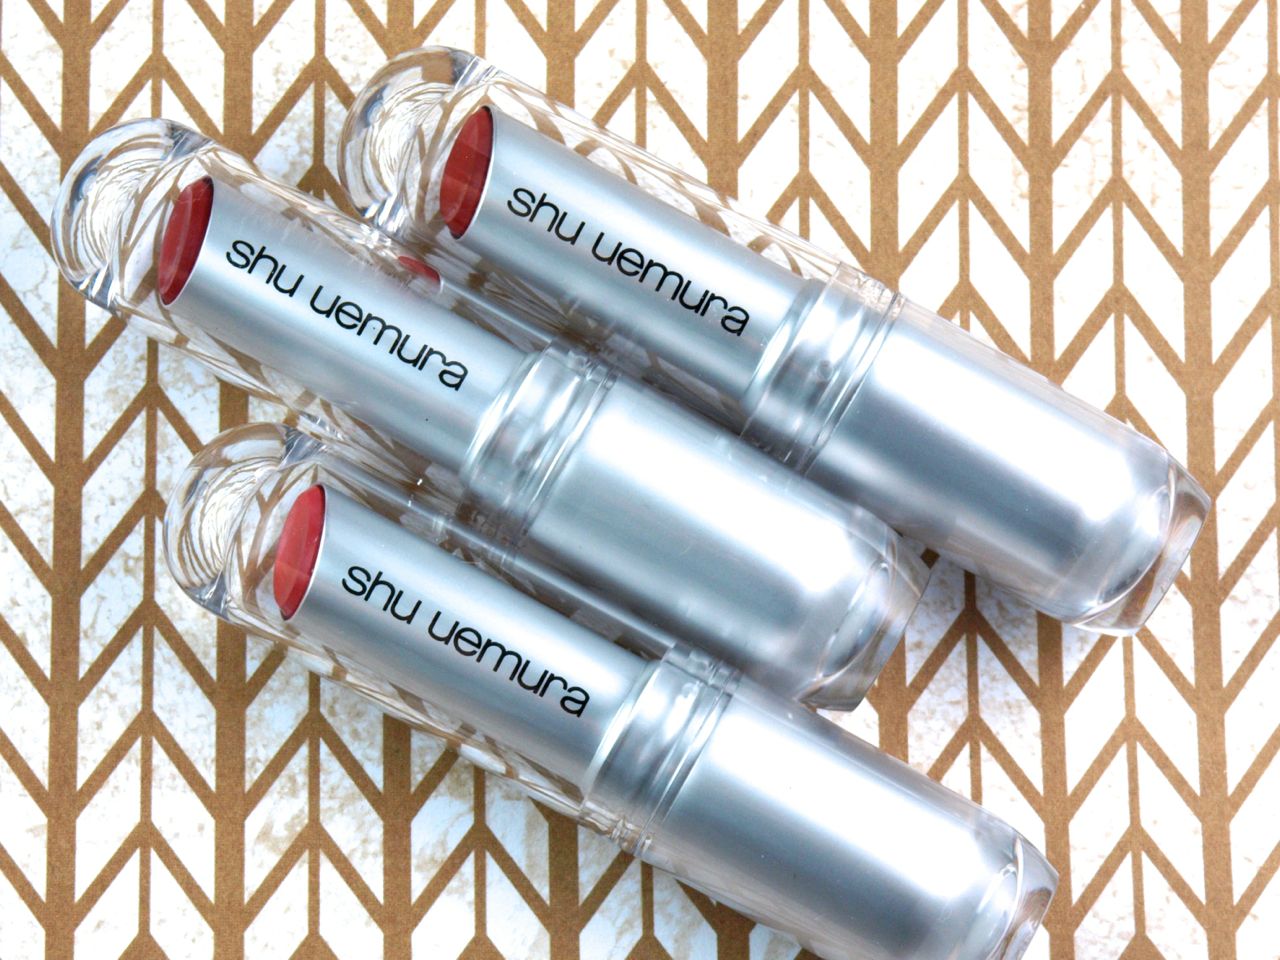 Shu Uemura Rouge Unlimited Lipstick My Dear Matte Collection: Review and Swatches